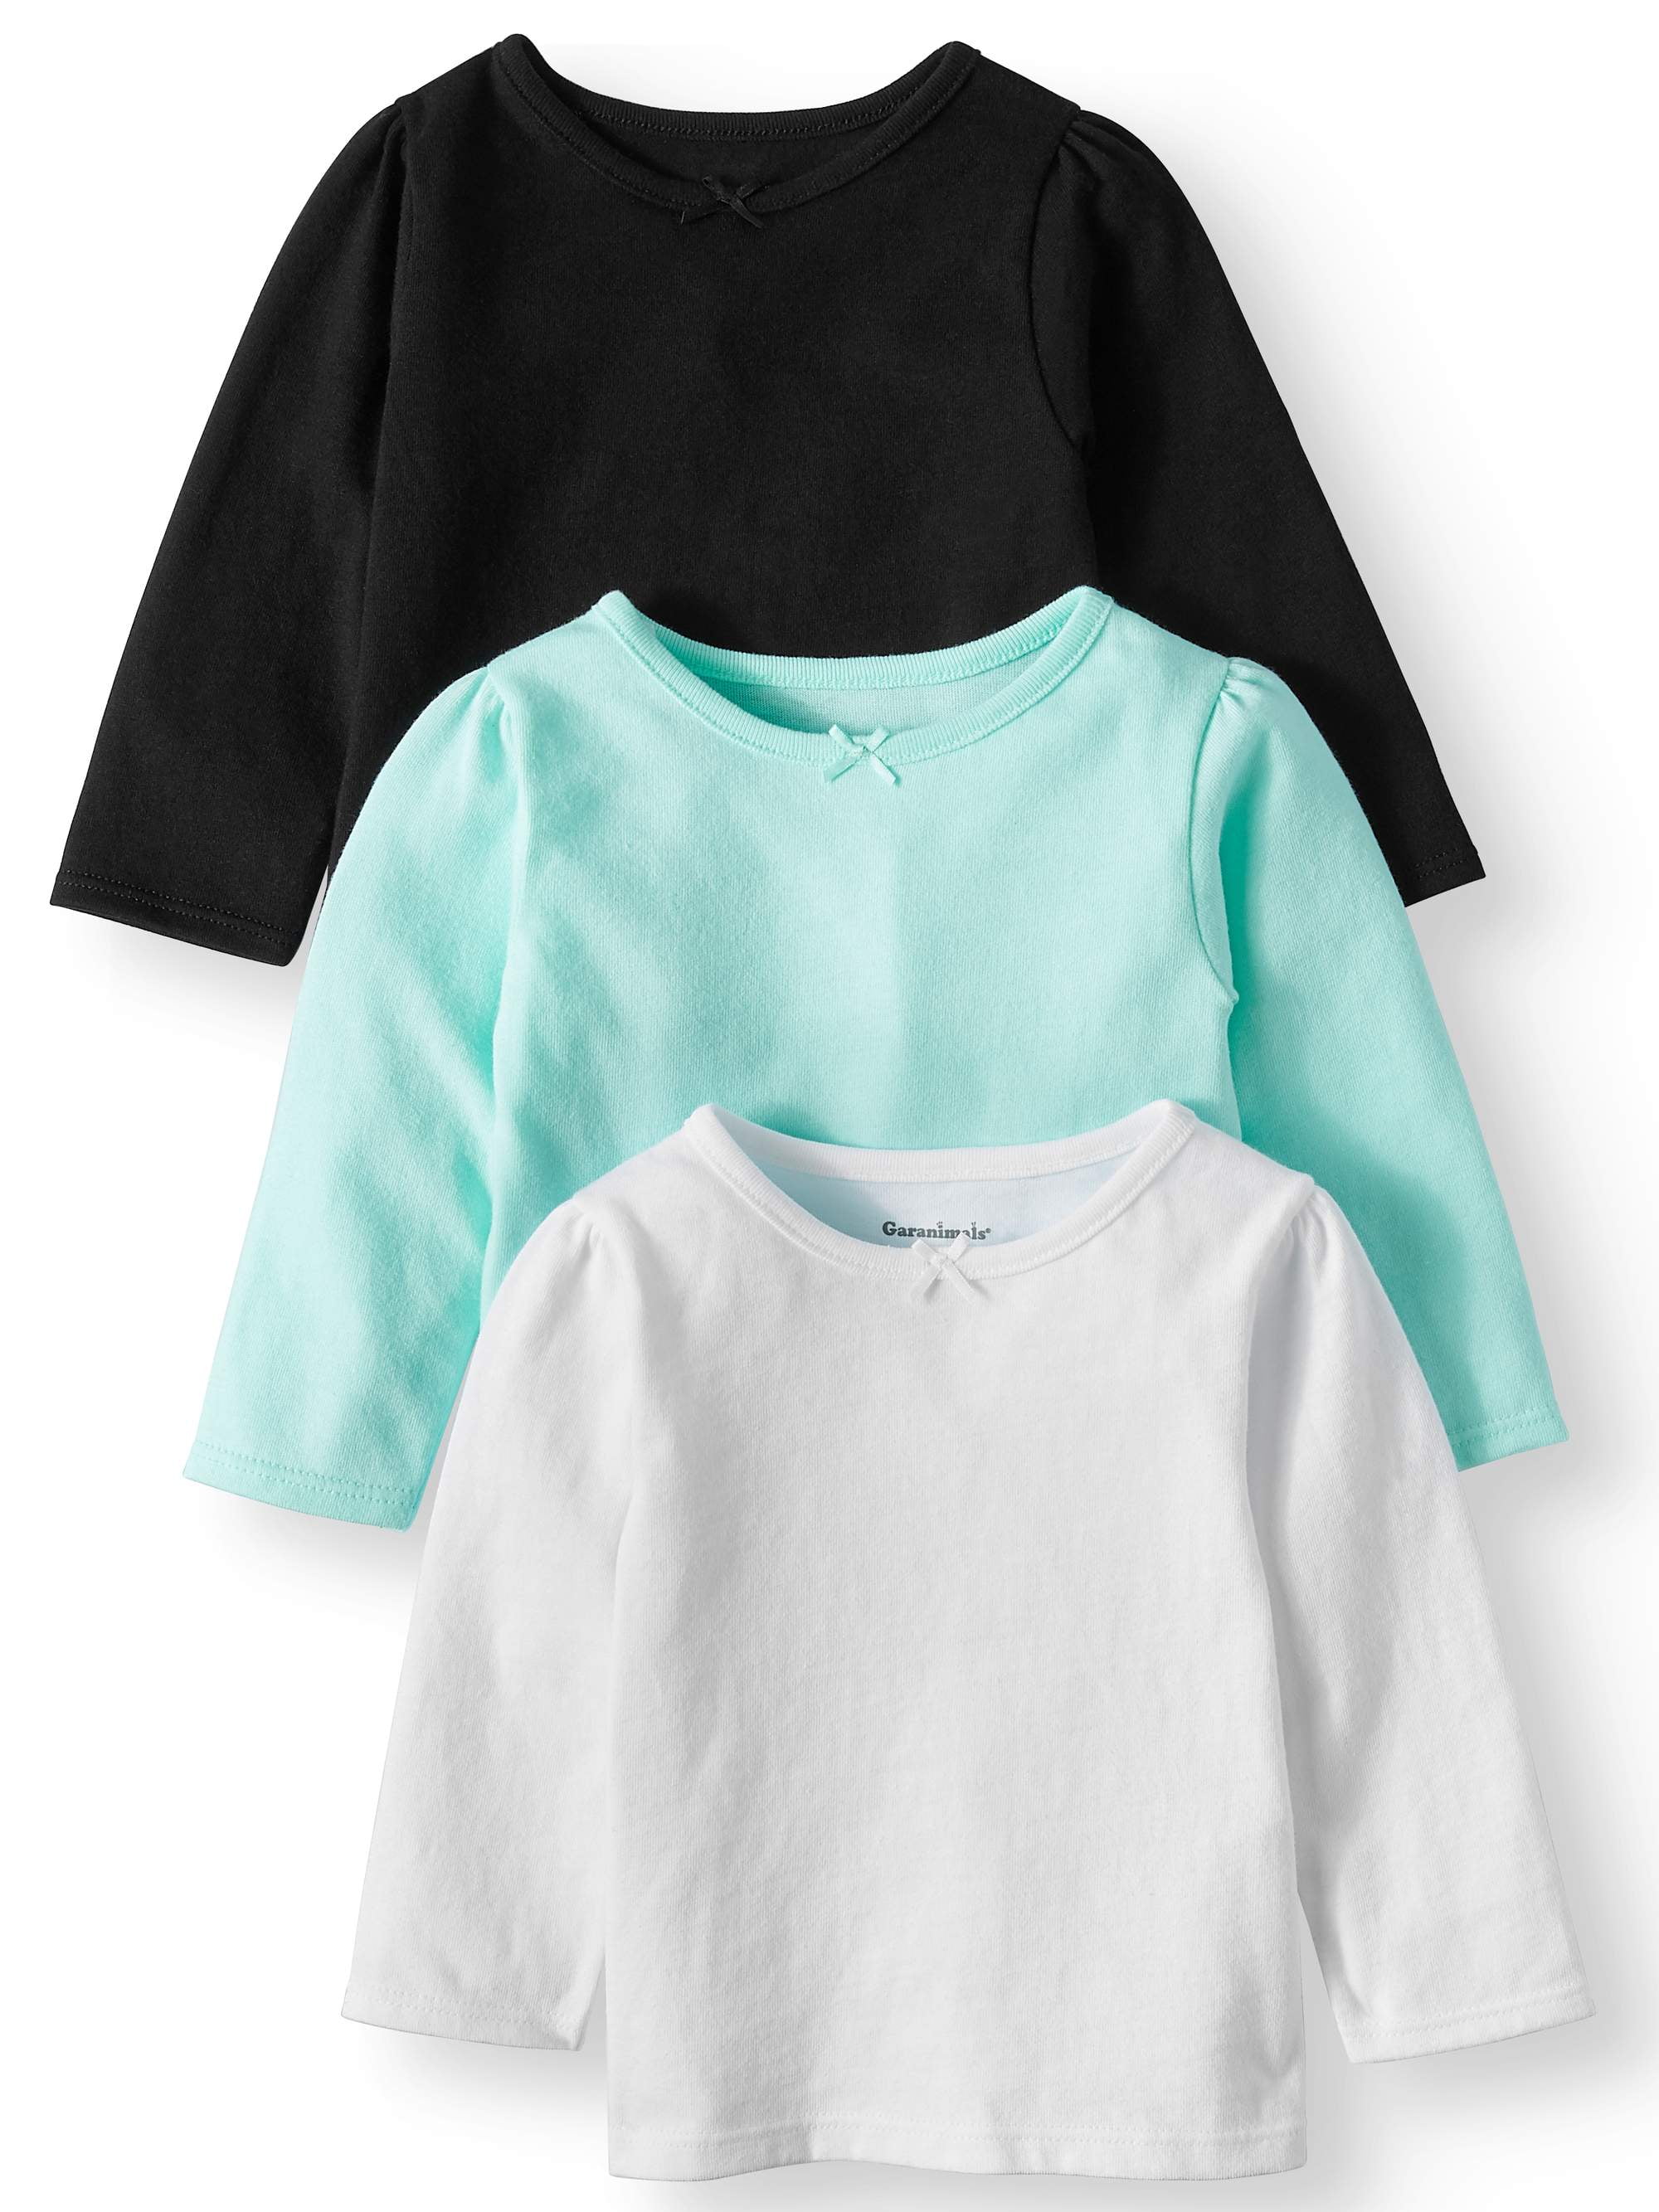 Long Sleeve T-Shirts, 3-pack (Baby 